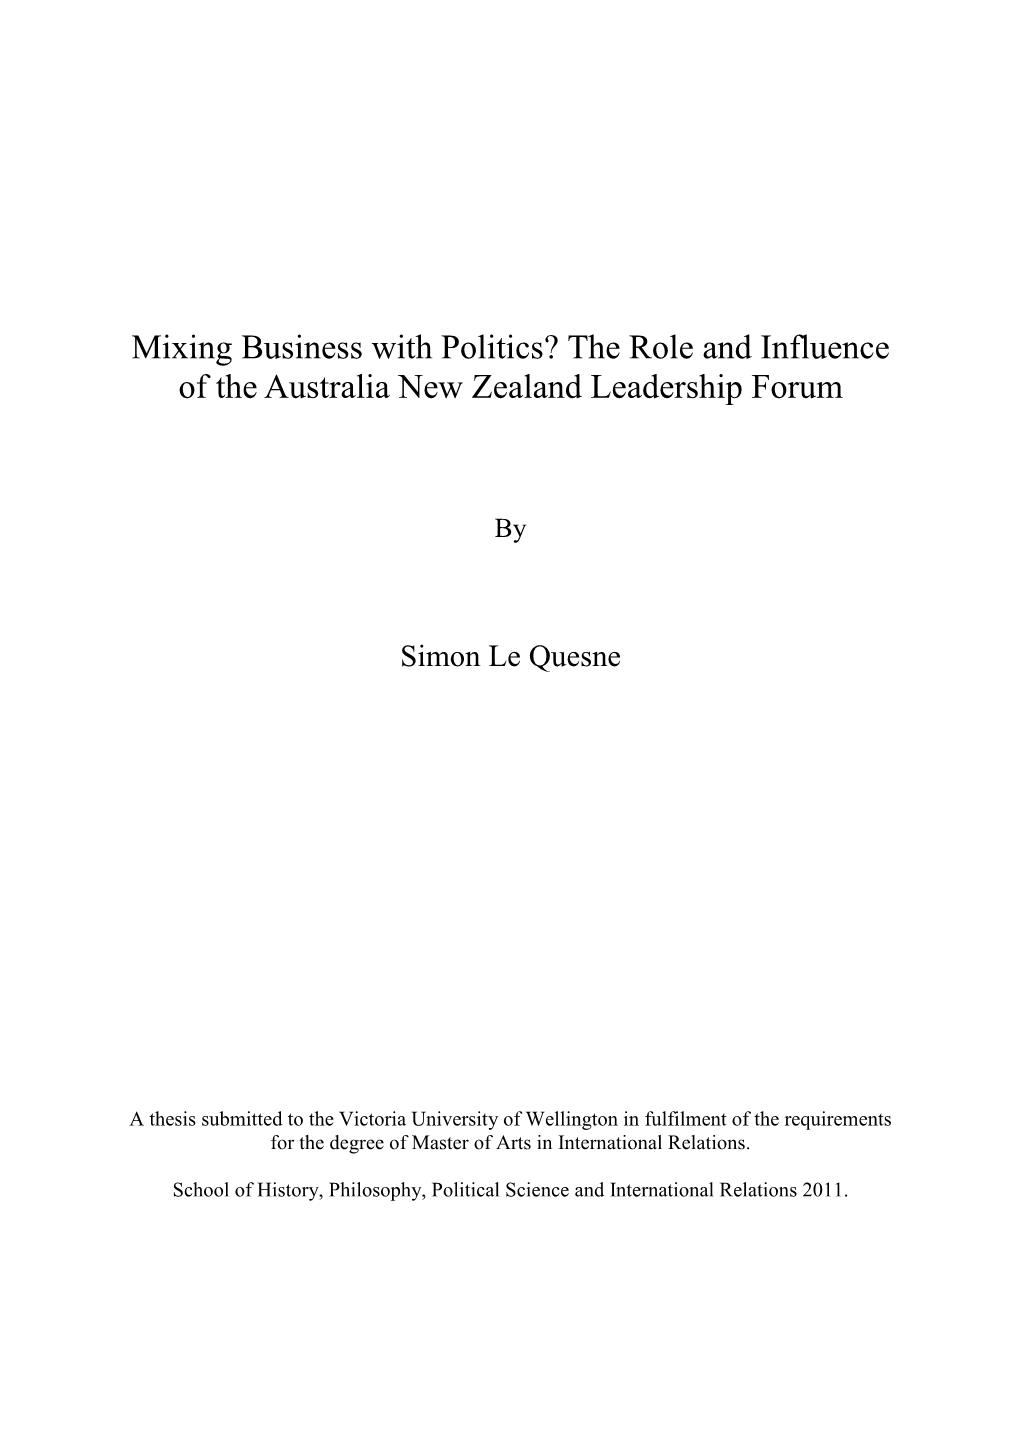 Mixing Business with Politics? the Role and Influence of the Australia New Zealand Leadership Forum